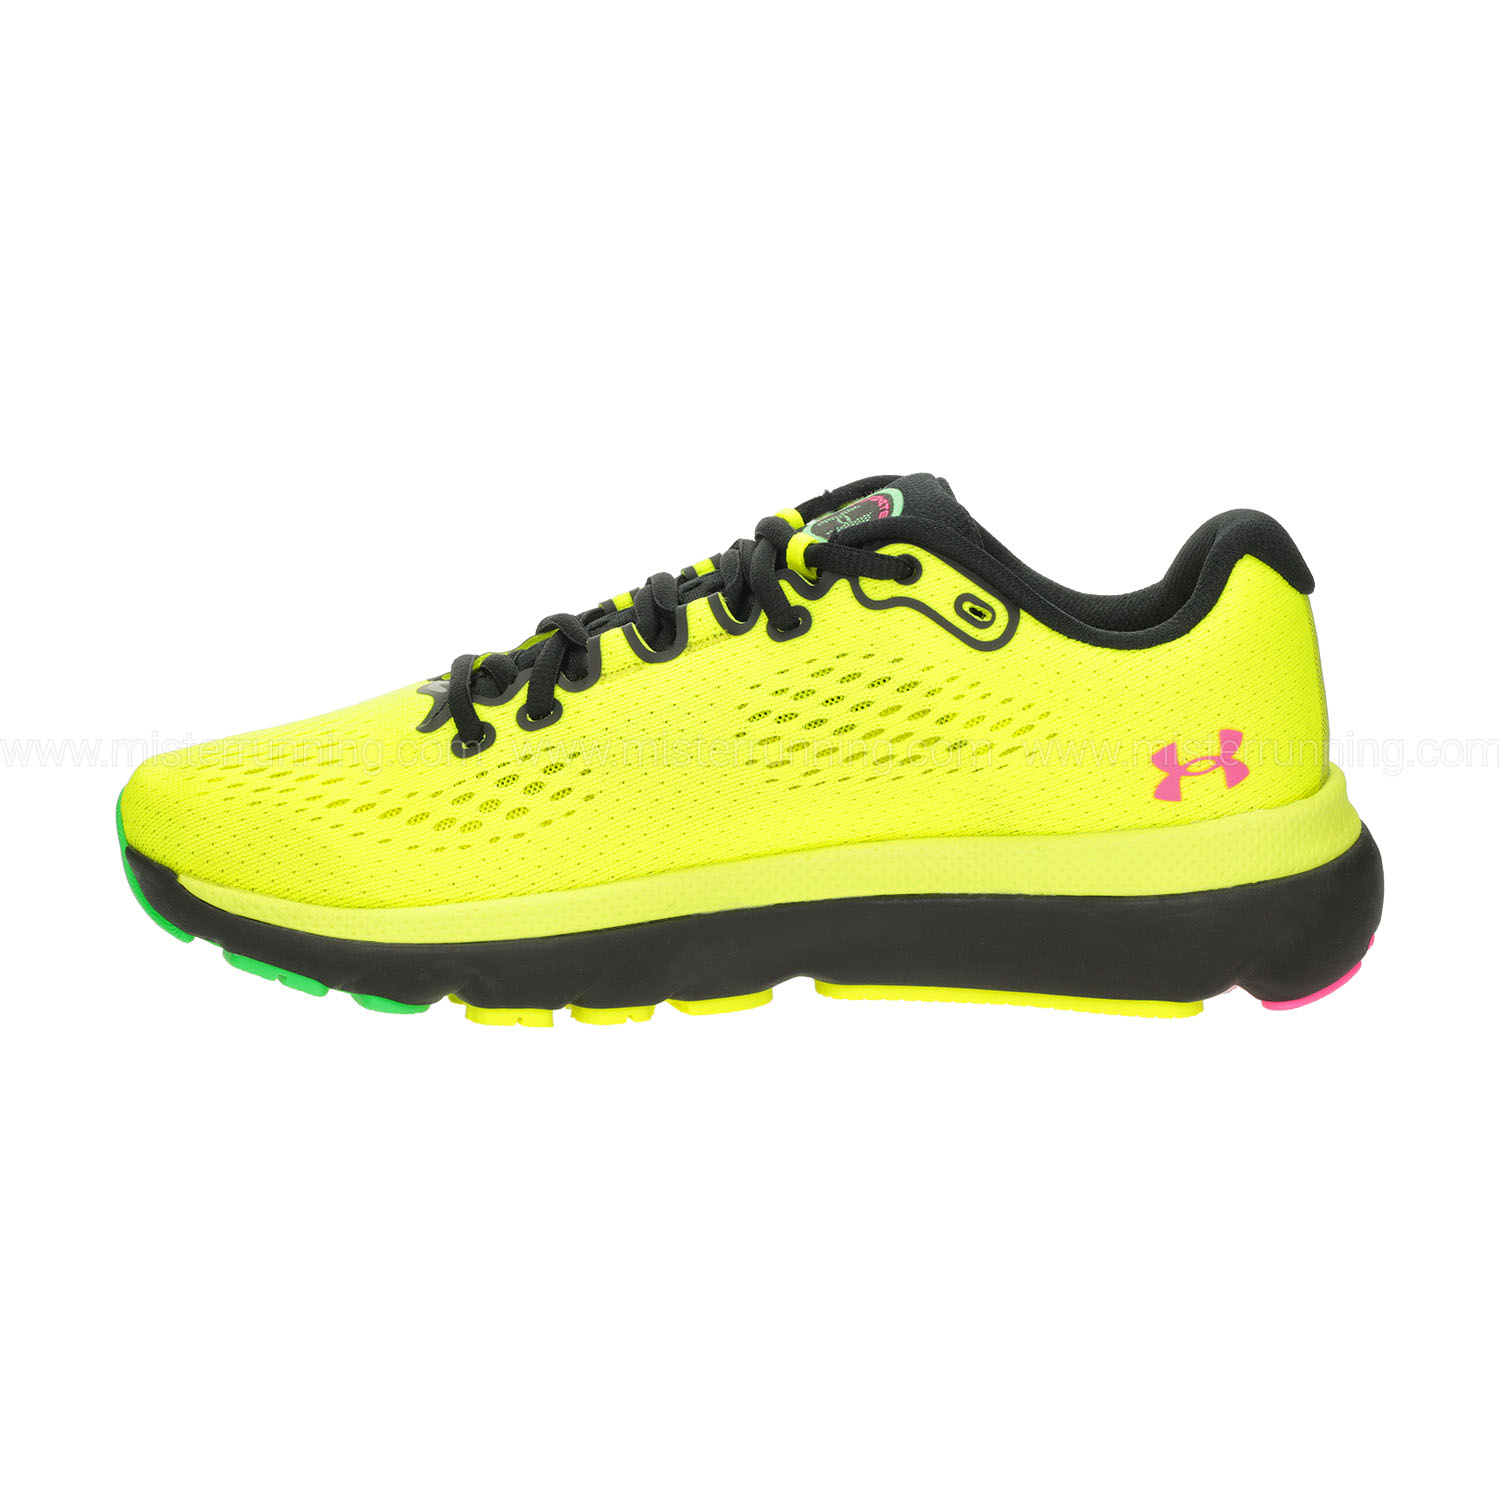 Under Armour HOVR Infinite 4 - Yellow Ray/Black